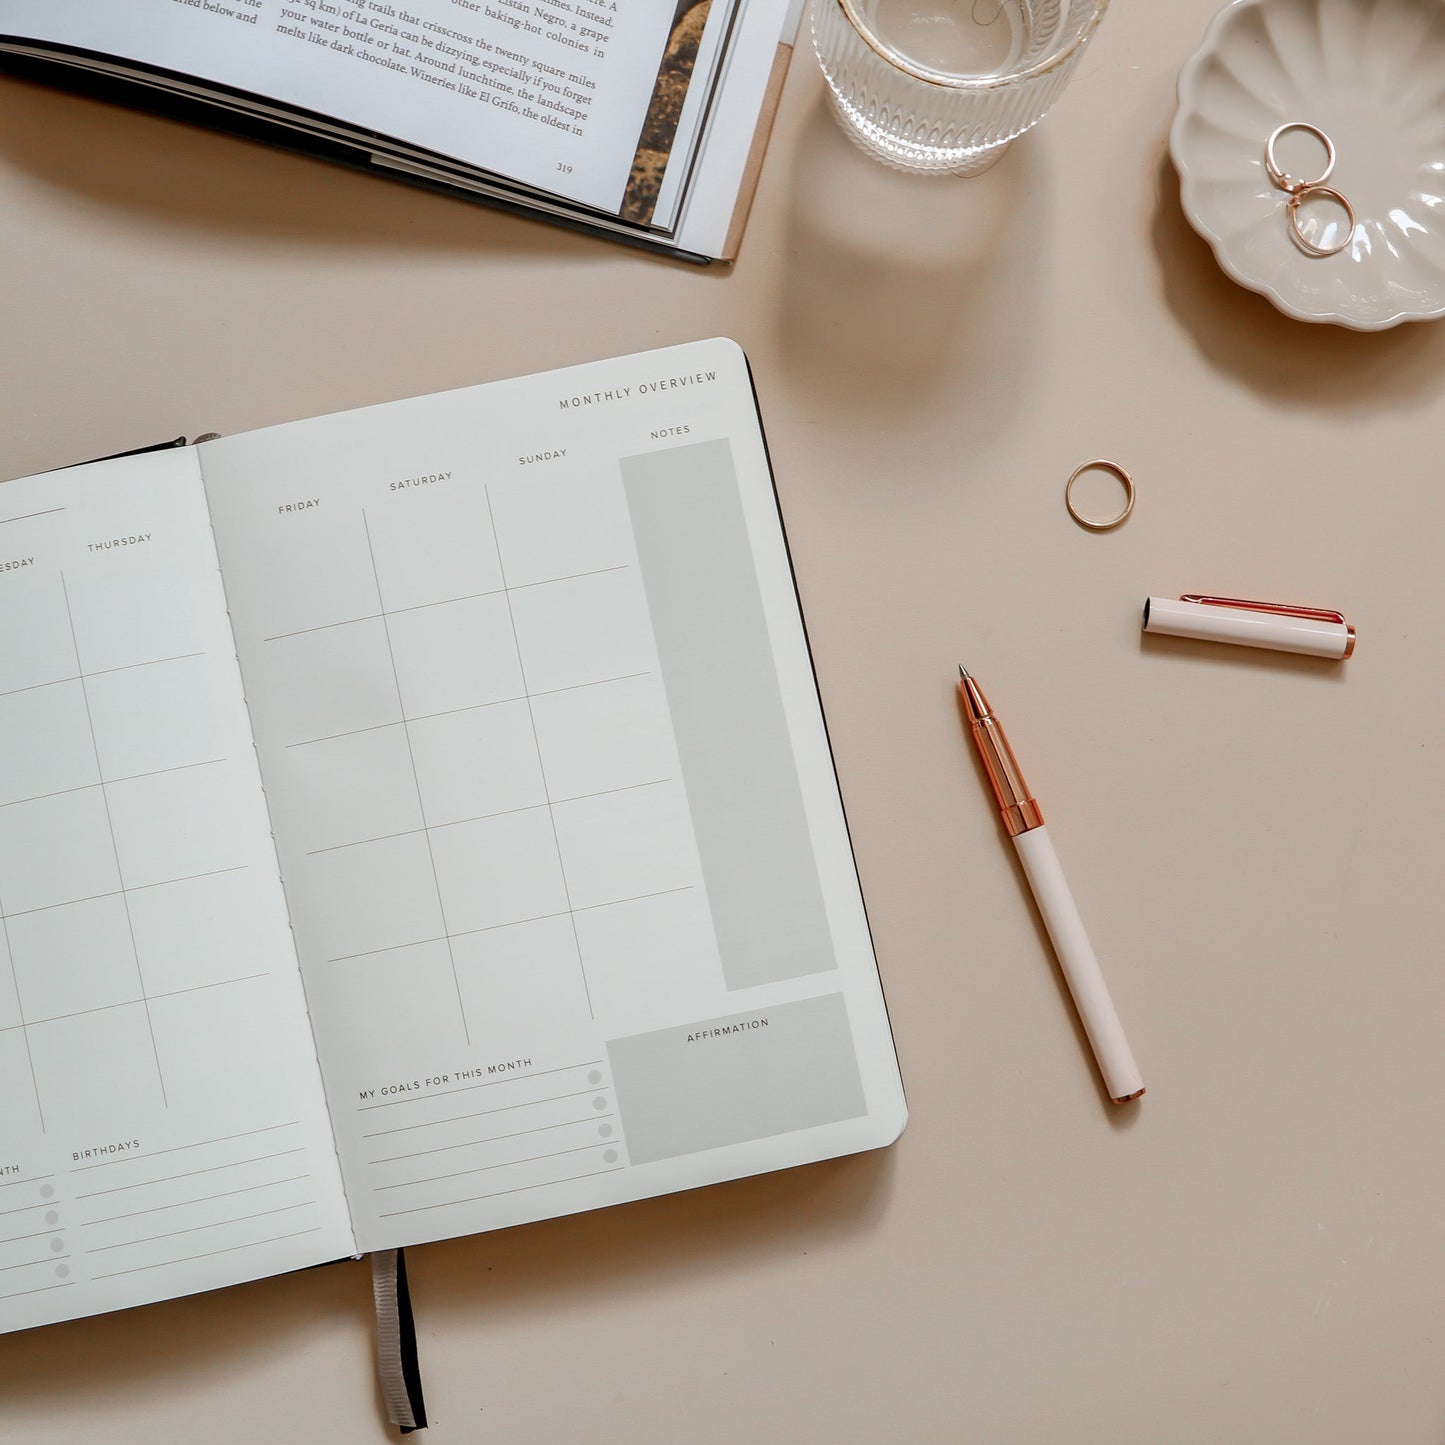 Undated Daily Productivity Planner (OUTLET)